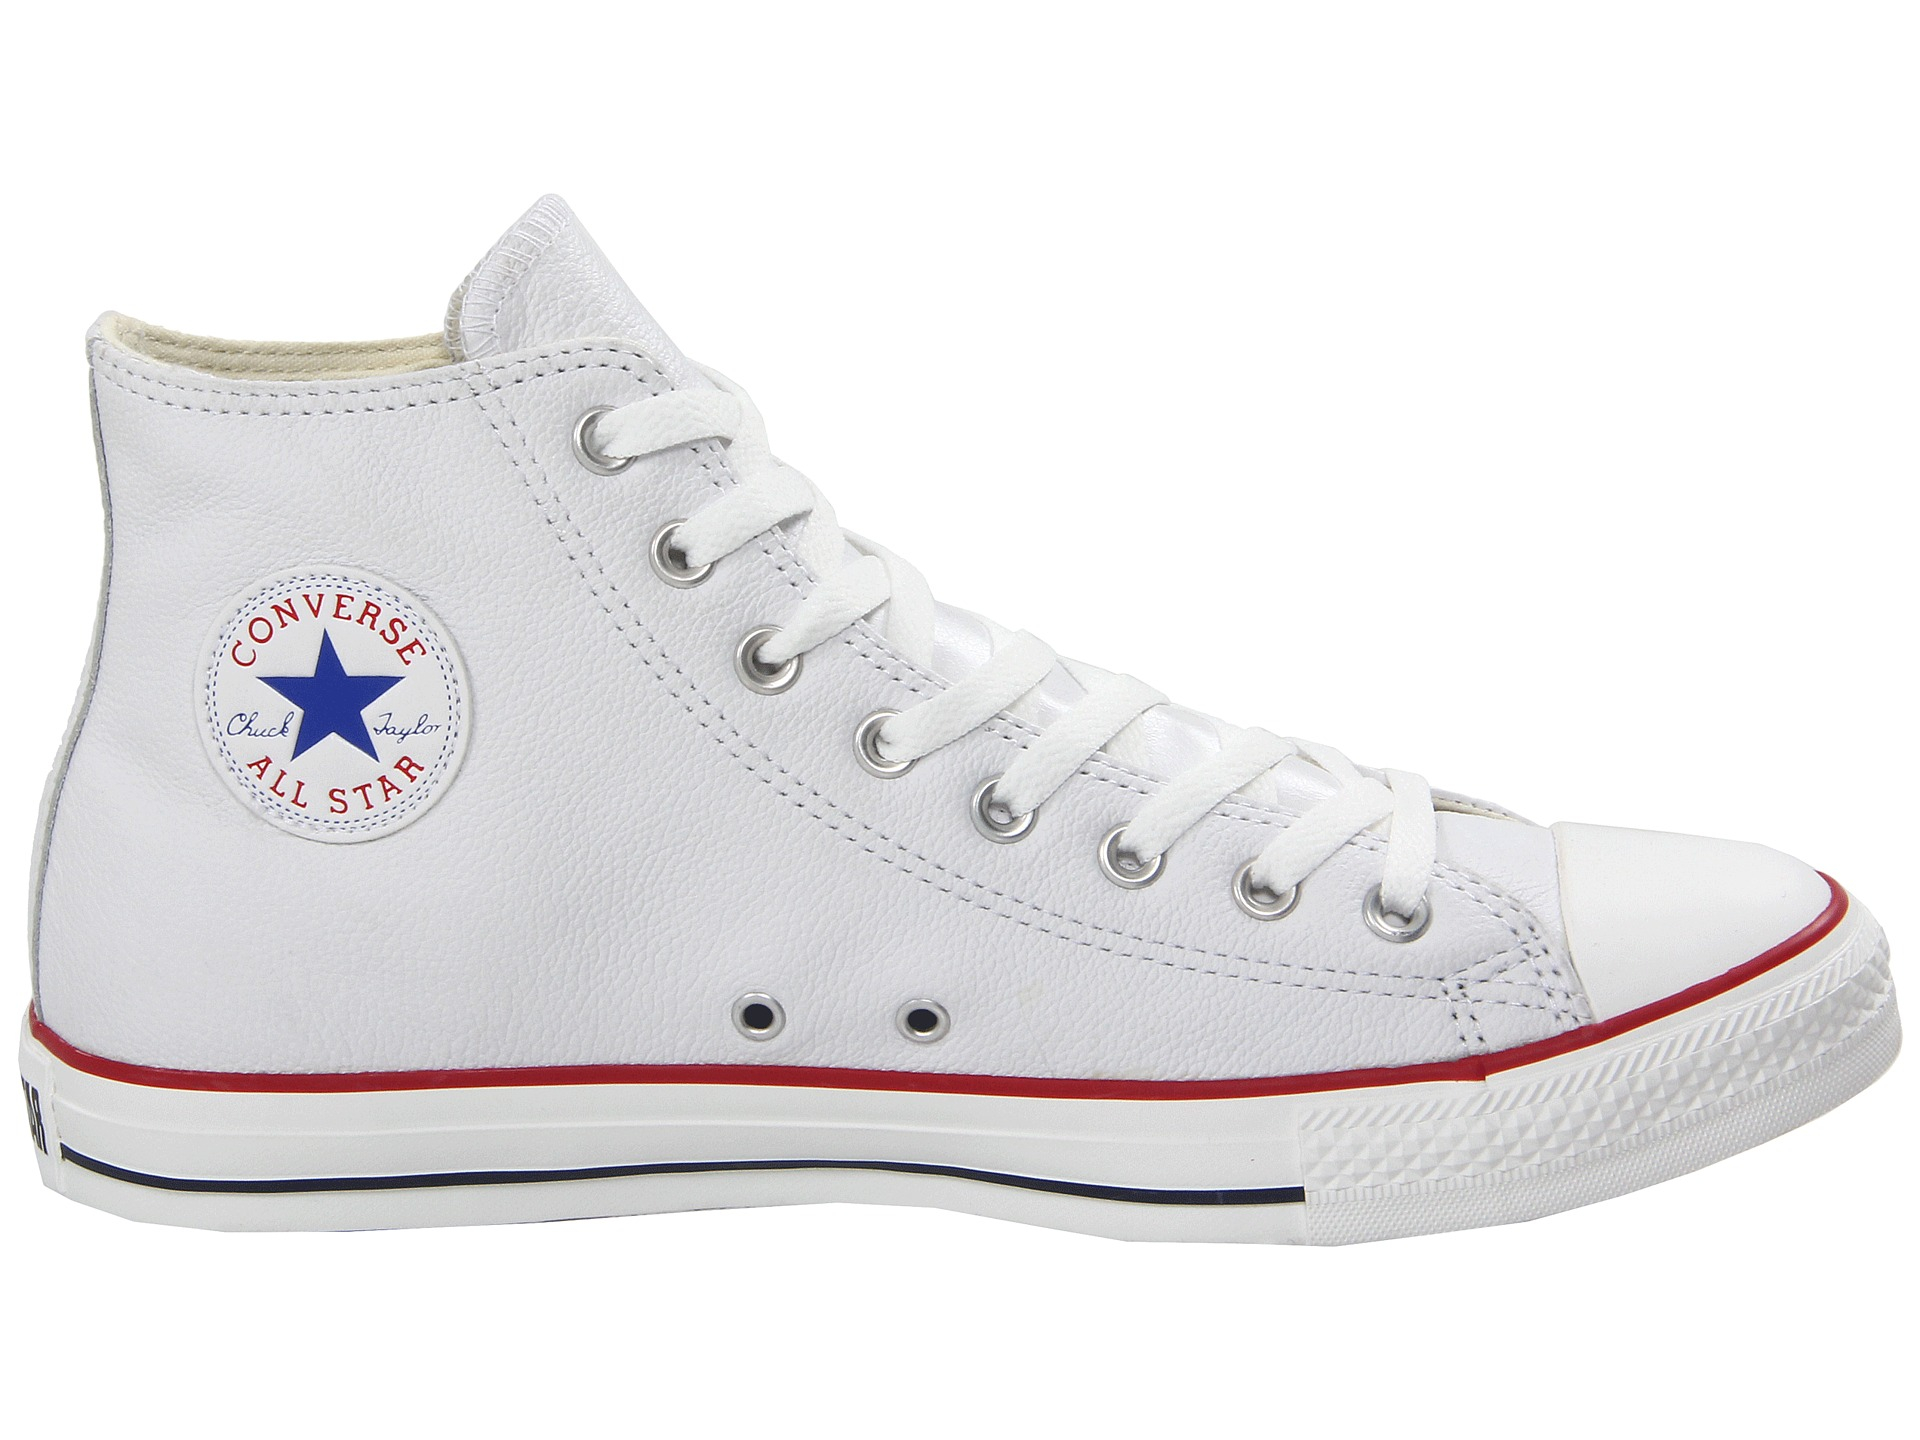 Converse White Chuck Taylorr All Starr Leather Hi Product 1 22815132 2 198377005 Normal 